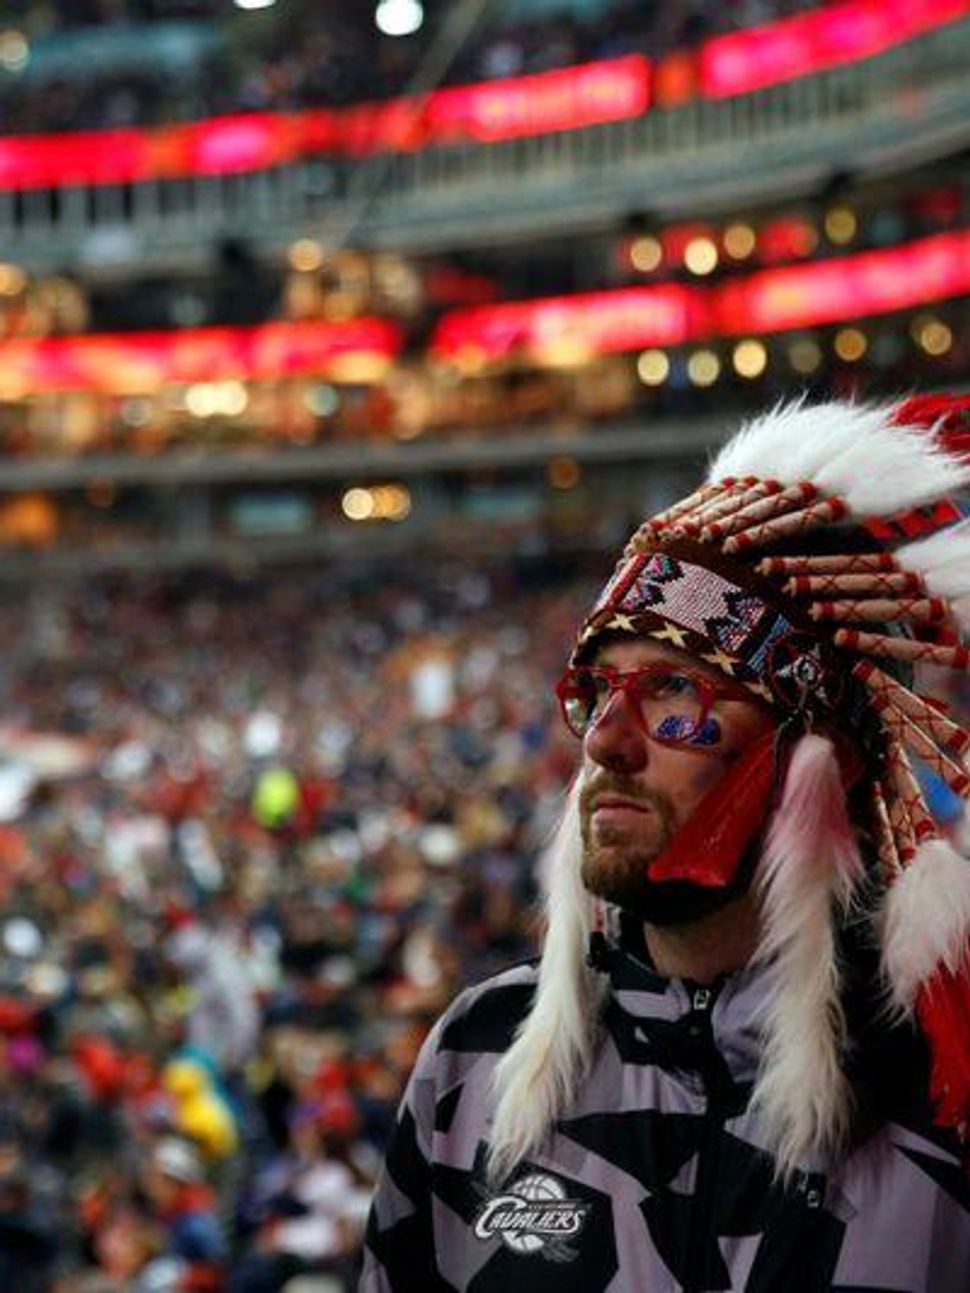 Cleveland Indians will refuse entry to fans in offensive dress